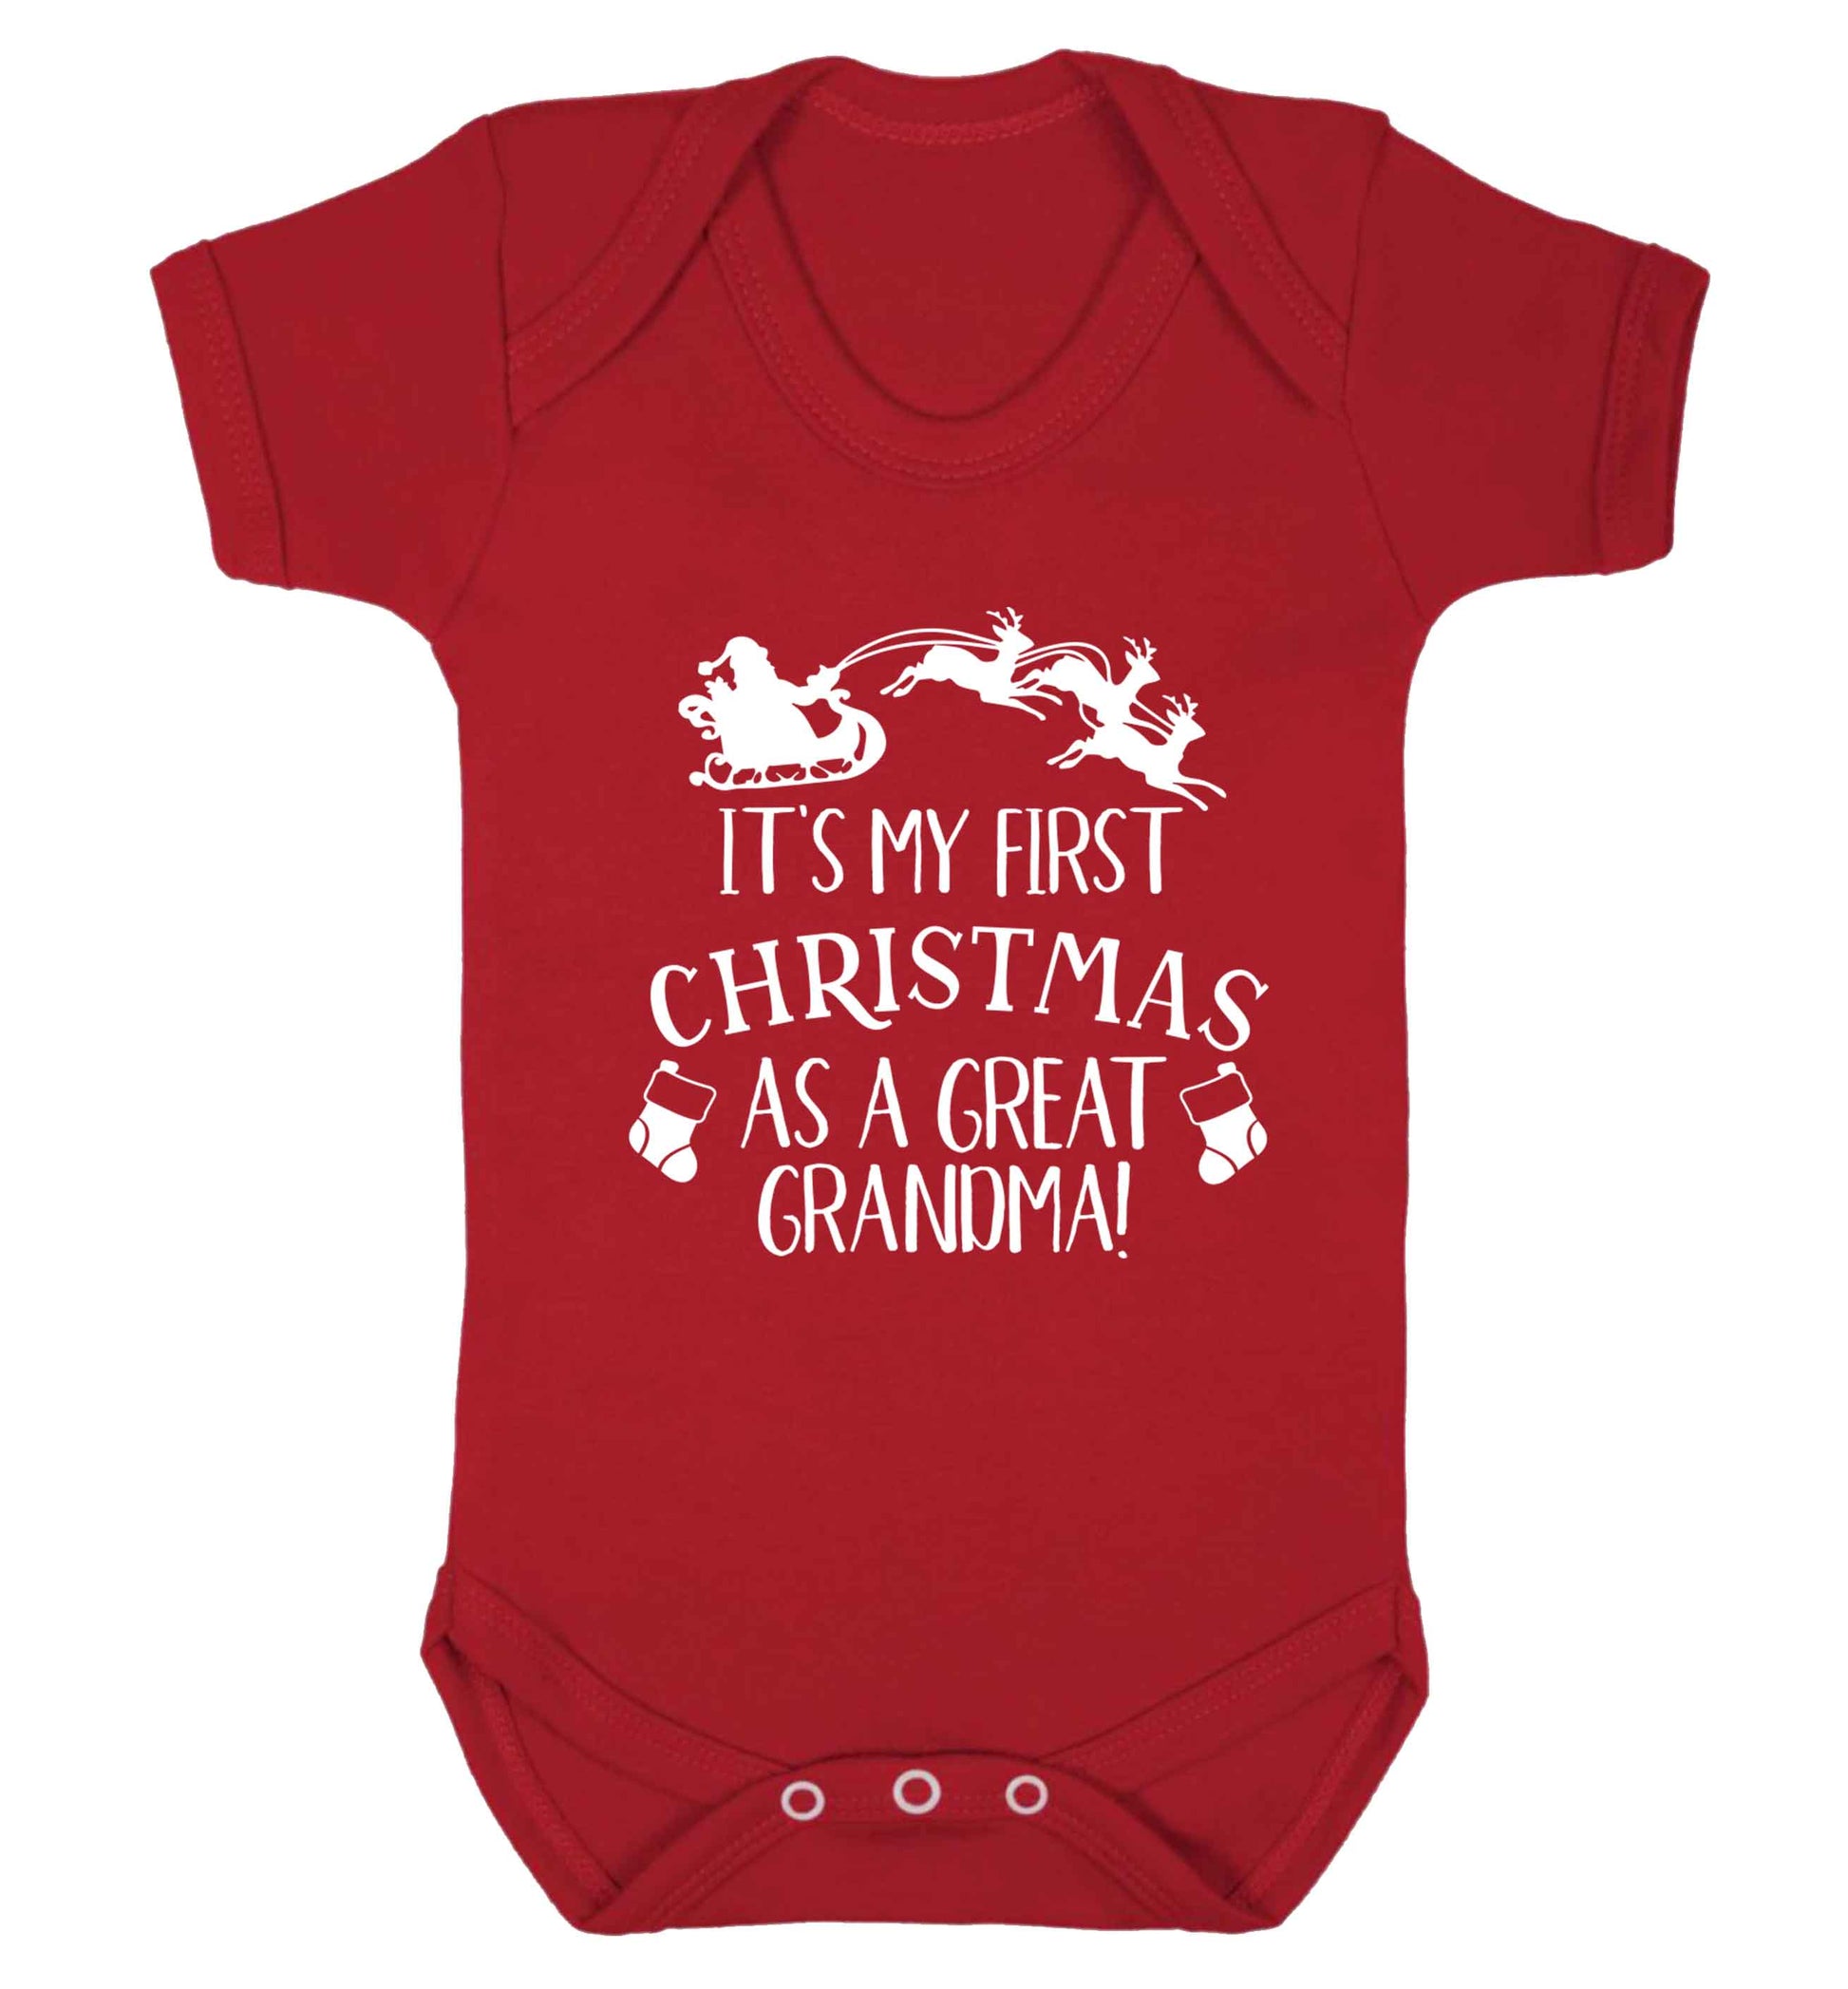 It's my first Christmas as a great grandma! Baby Vest red 18-24 months